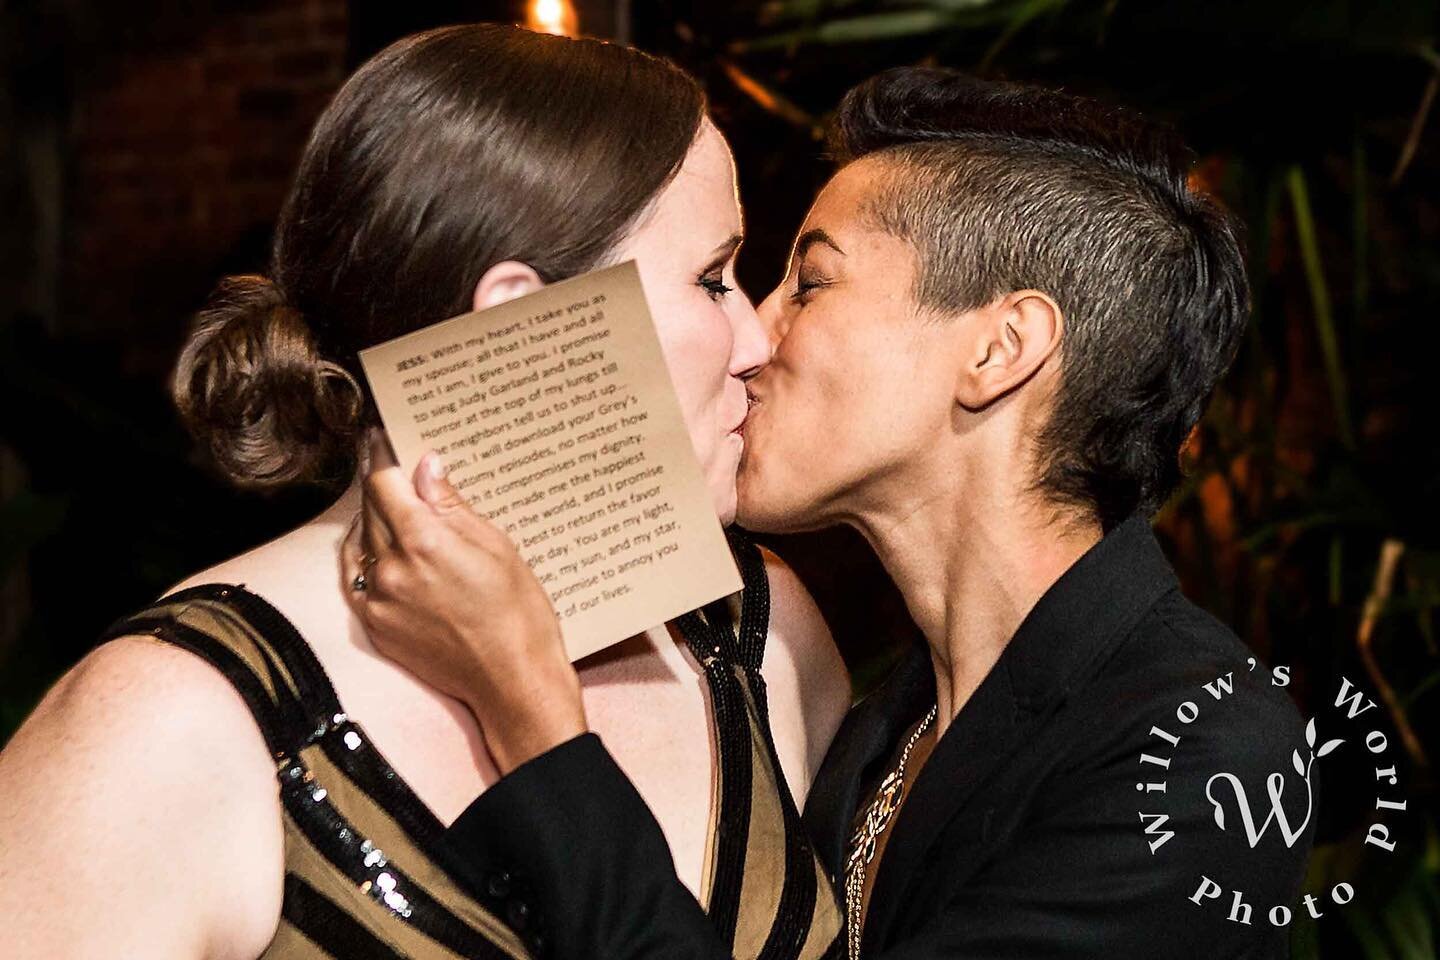 This #throwbackthursday @pharmacymuseum wedding featured some of my all-time favorite vows.  Being able to reread them on this heartfelt first kiss just makes it all the sweeter!